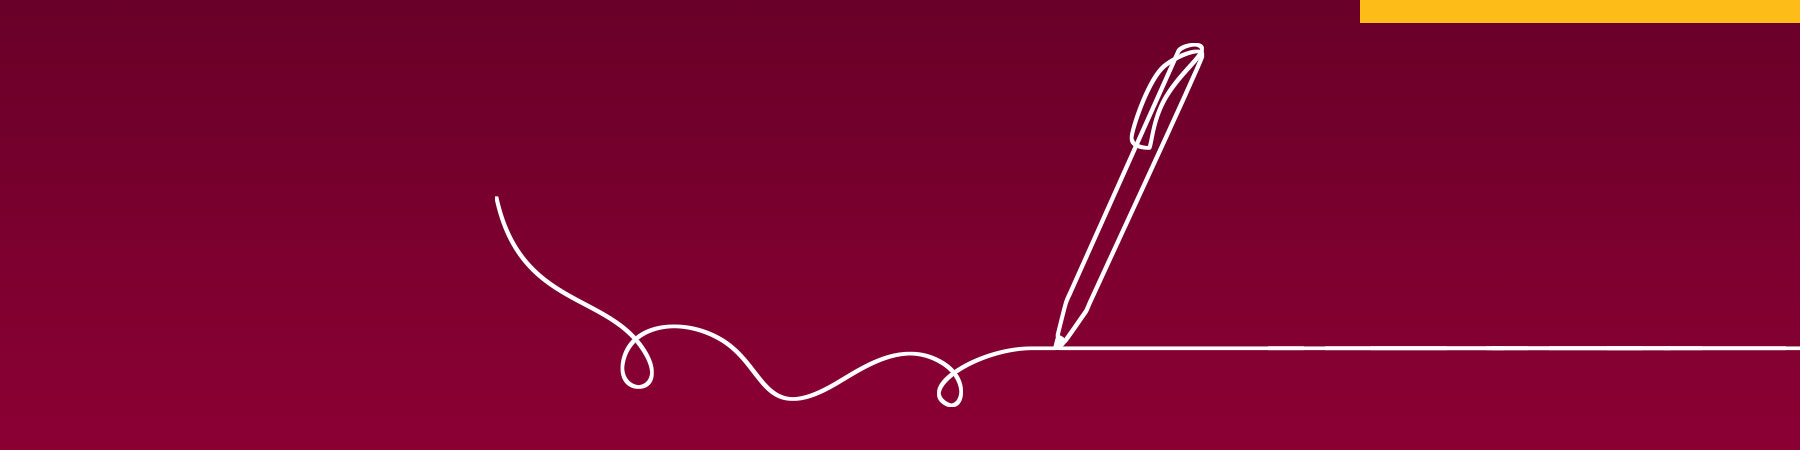 White line illustration of a pen, against a maroon background, to demonstrate Loyola University Chicago's content development work.